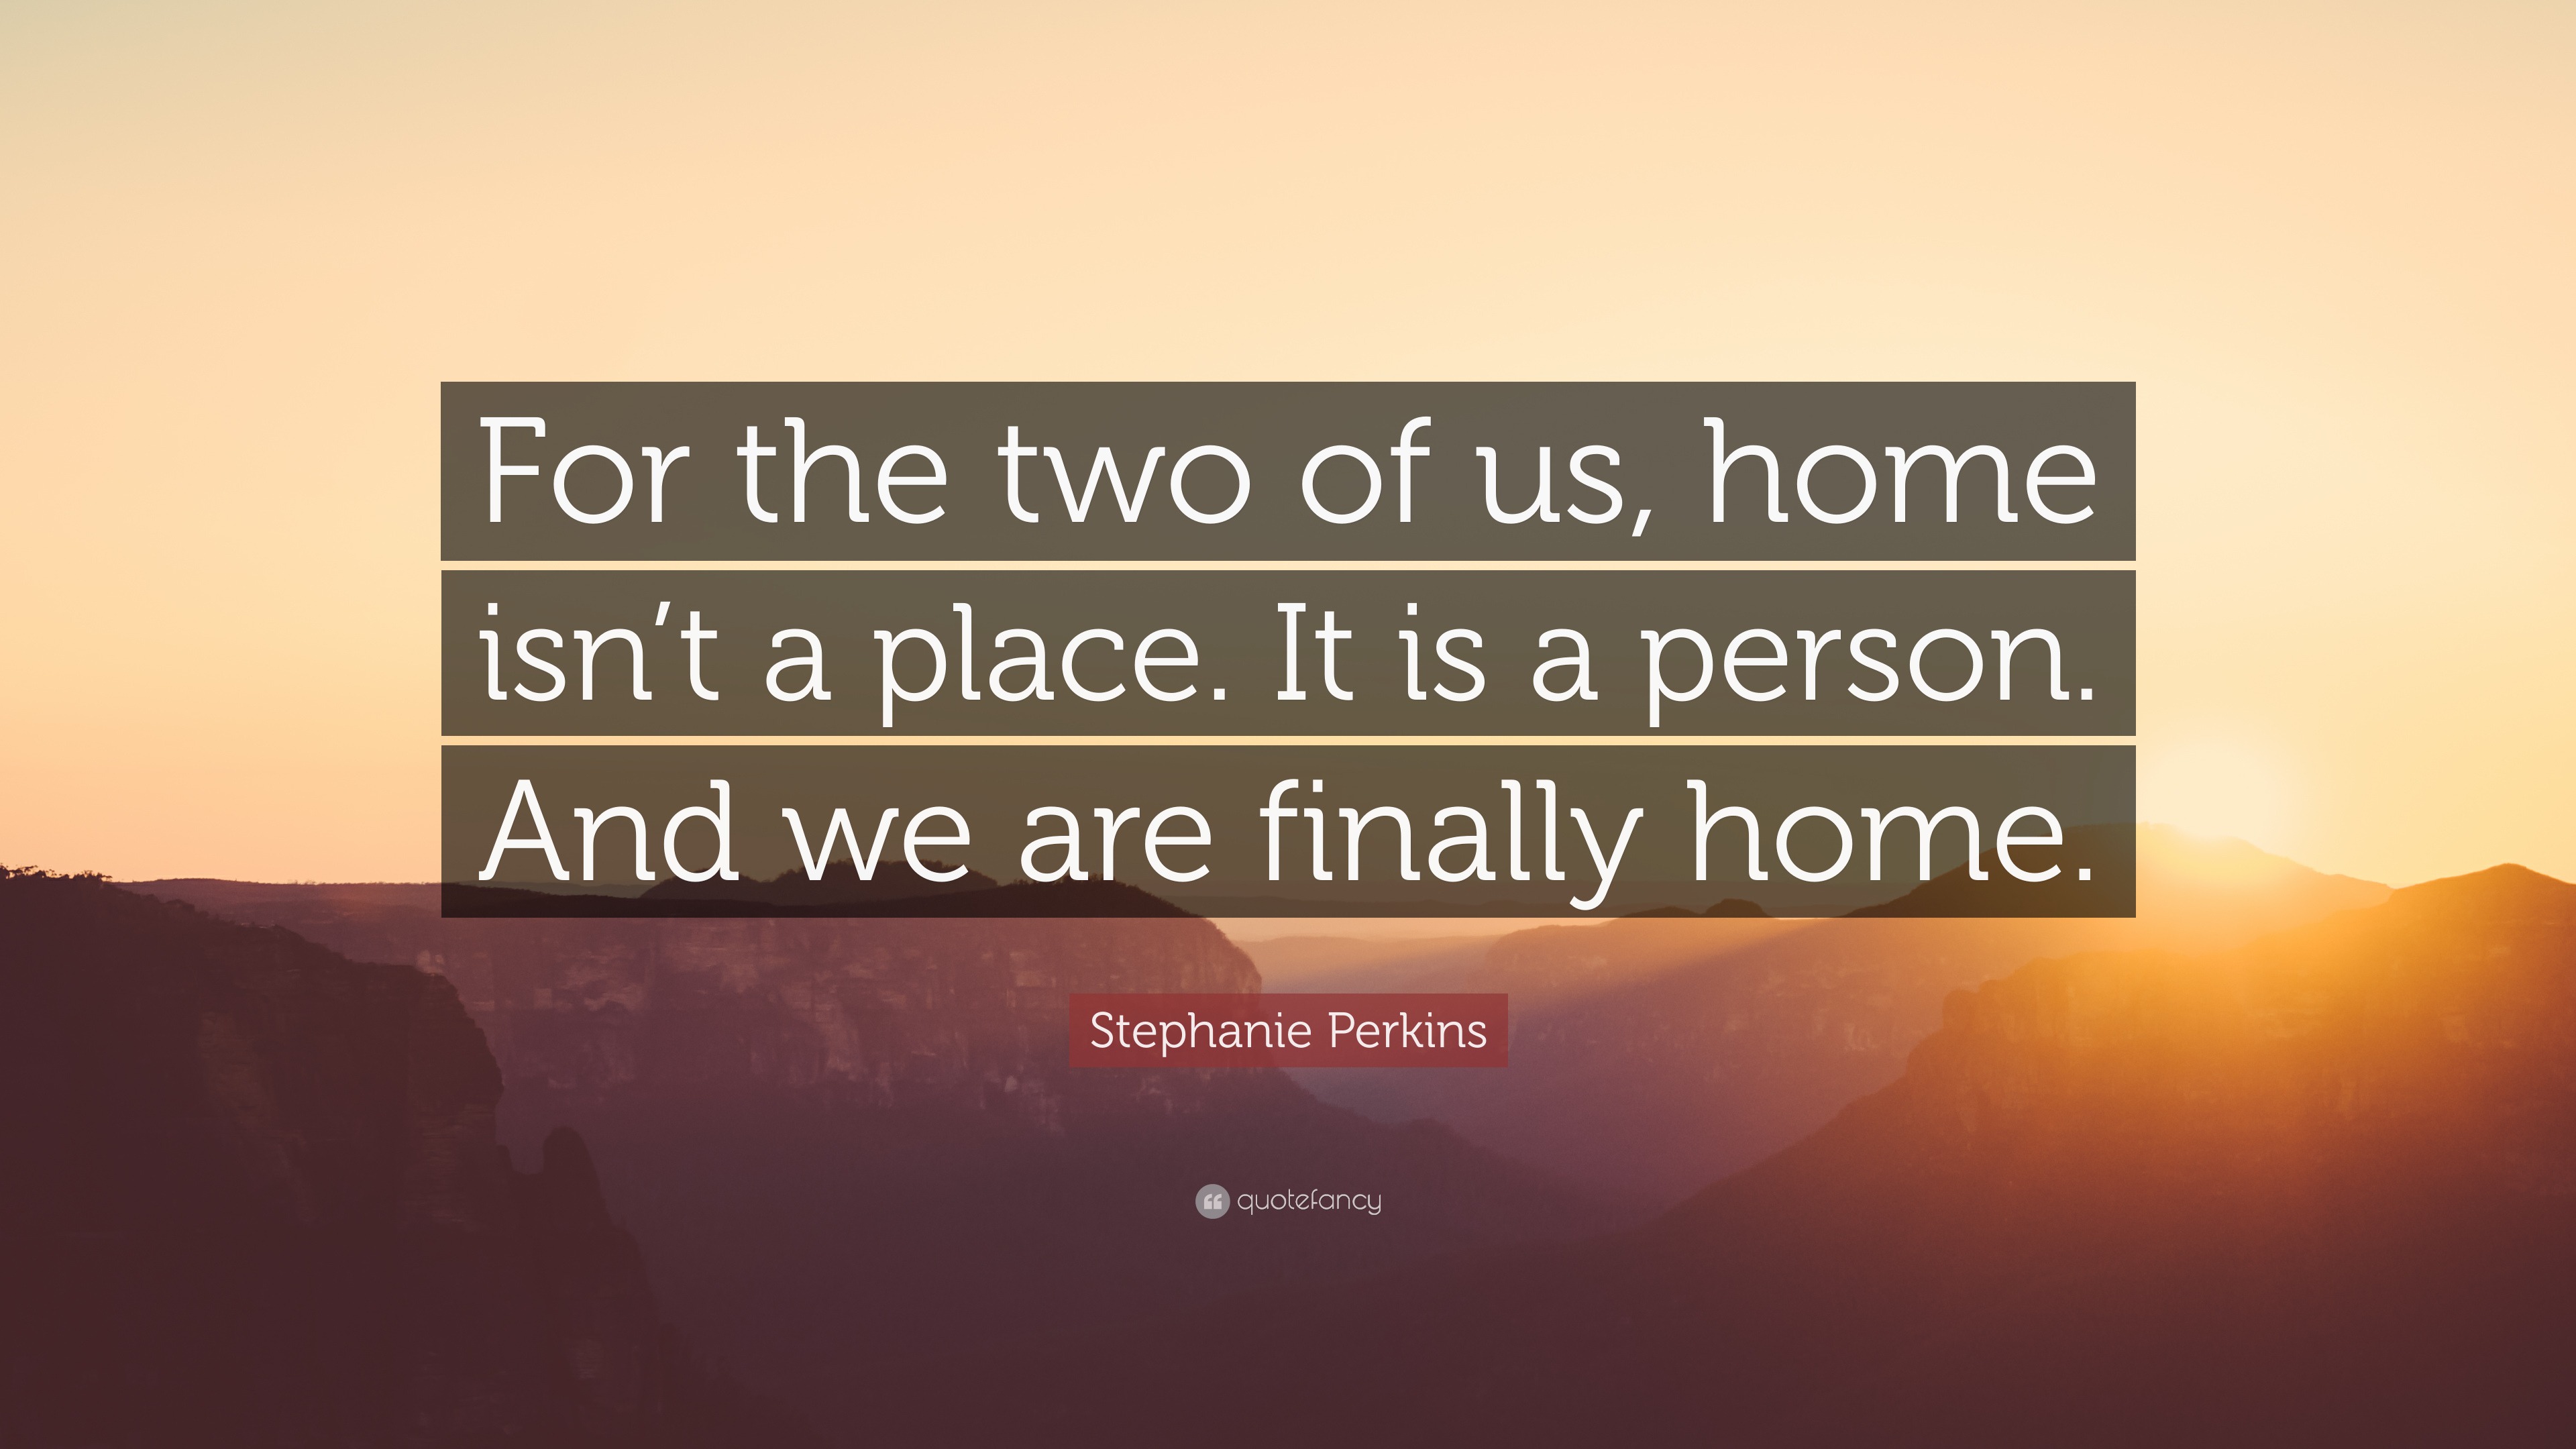 Stephanie Perkins Quote: “For the two of us, home isn’t a place. It is ...